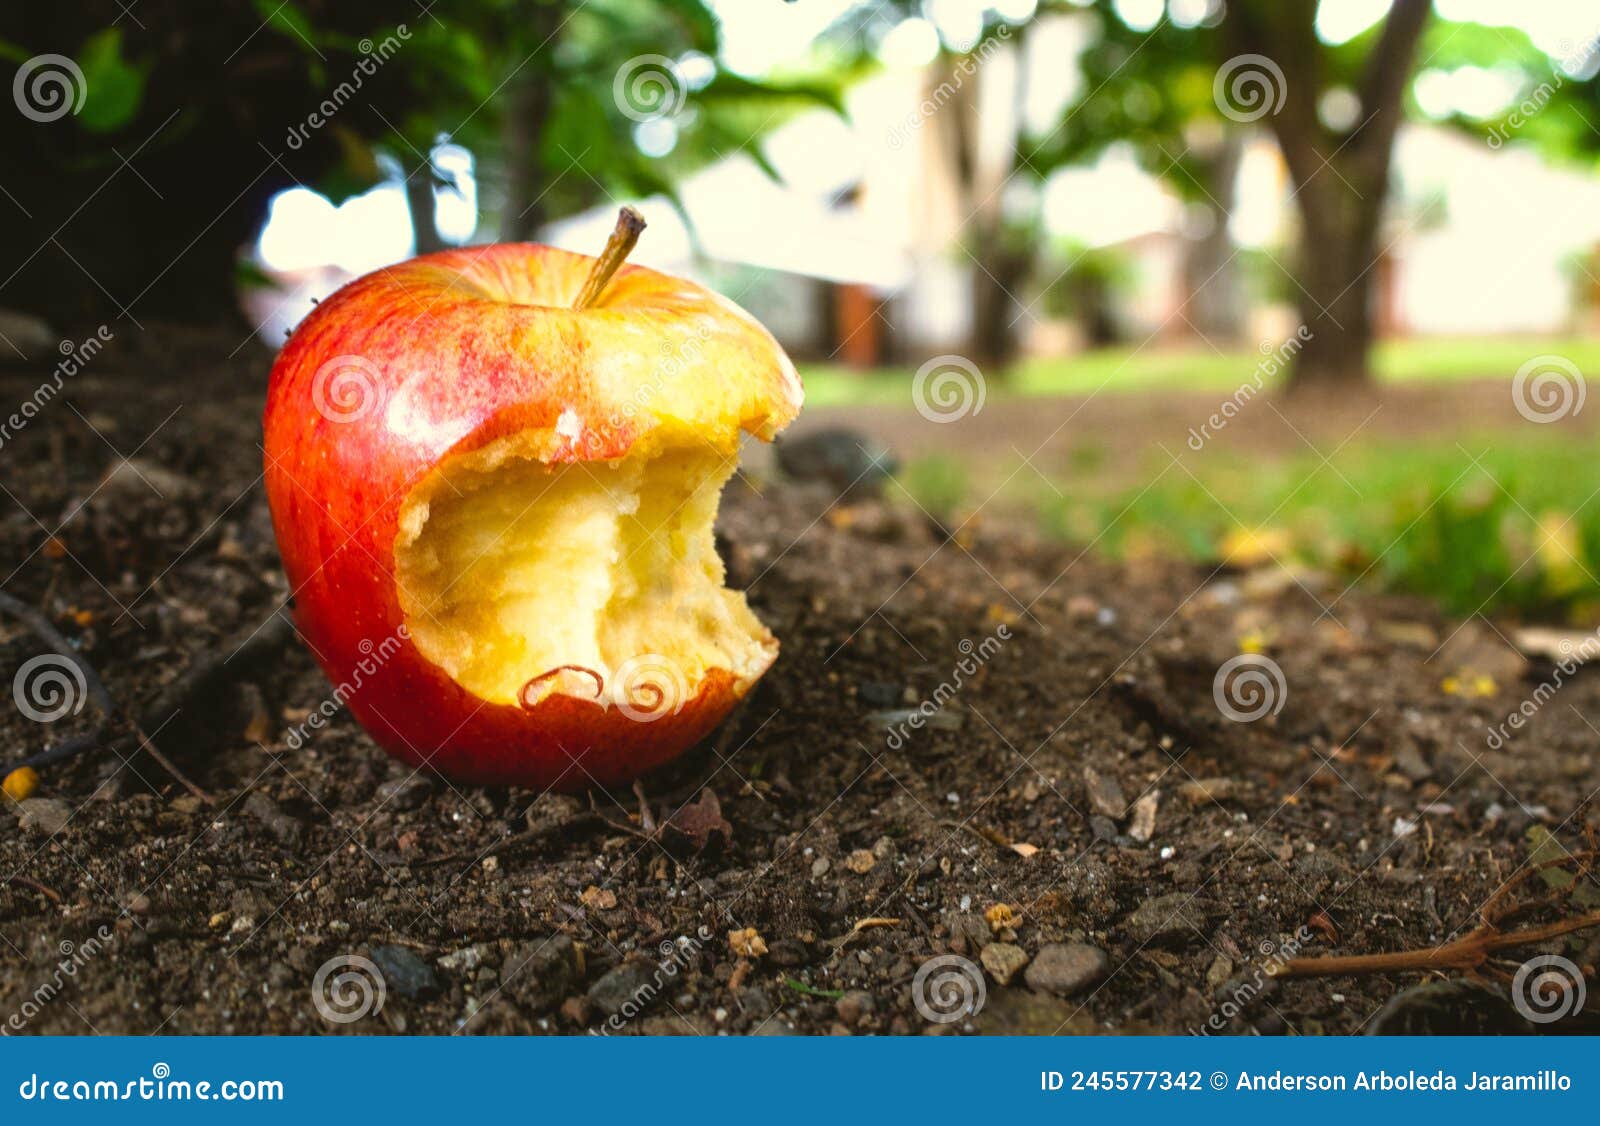 bitten apple lying on the ground with dirt outdoors